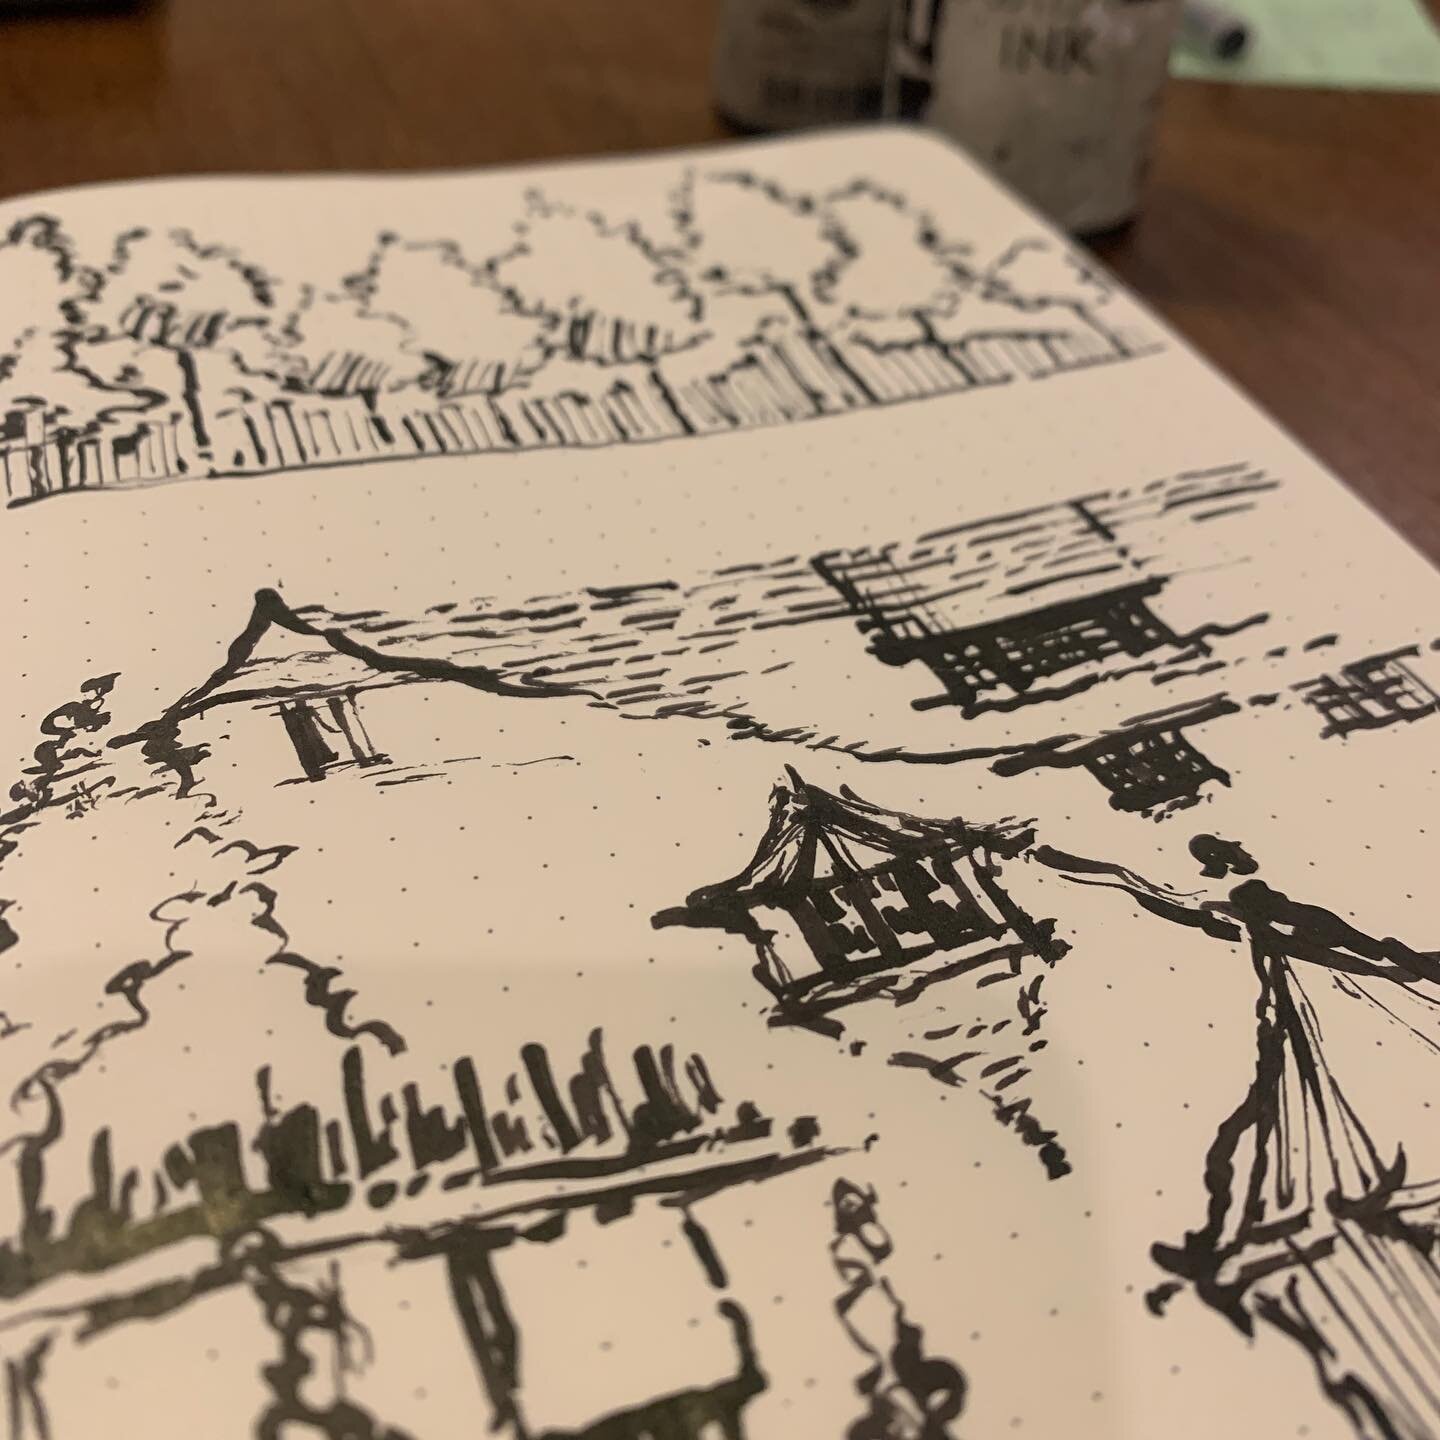 Found myself inspired by the work of @marekbad64 and @lachmair.art via @sketching_retreat and now here I am trying to &ldquo;free my mind&rdquo; with some shingle style doodles.